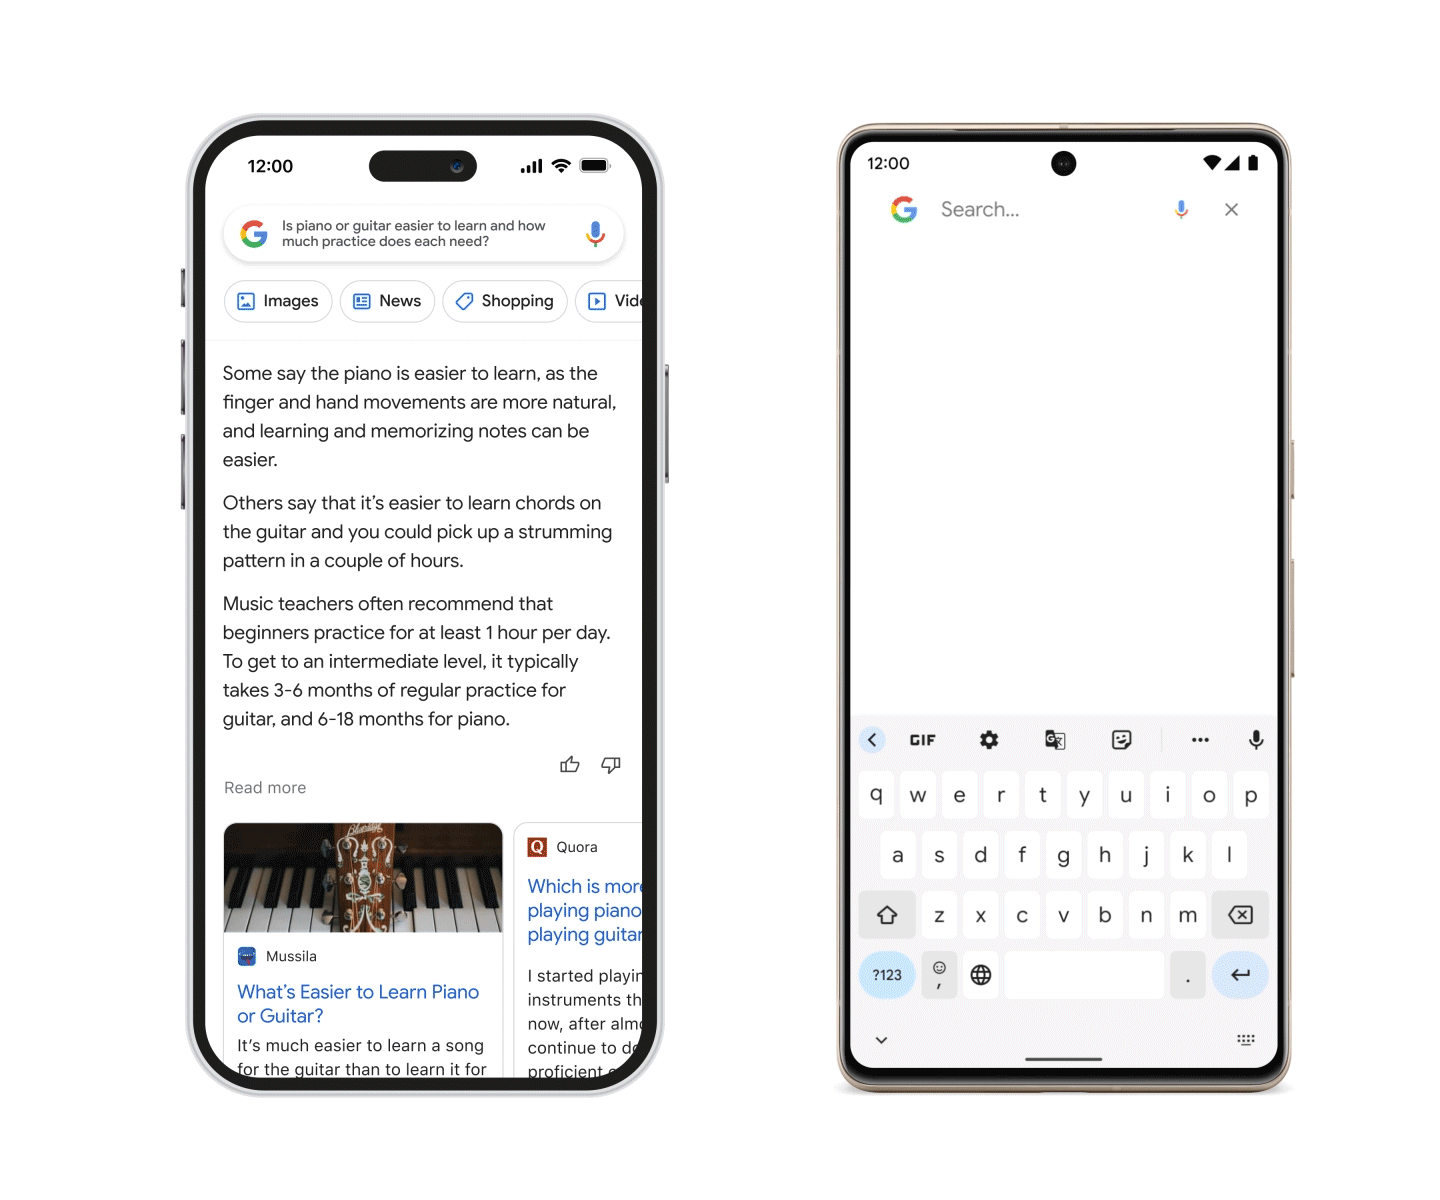 Google bard AI chatbot function in google search